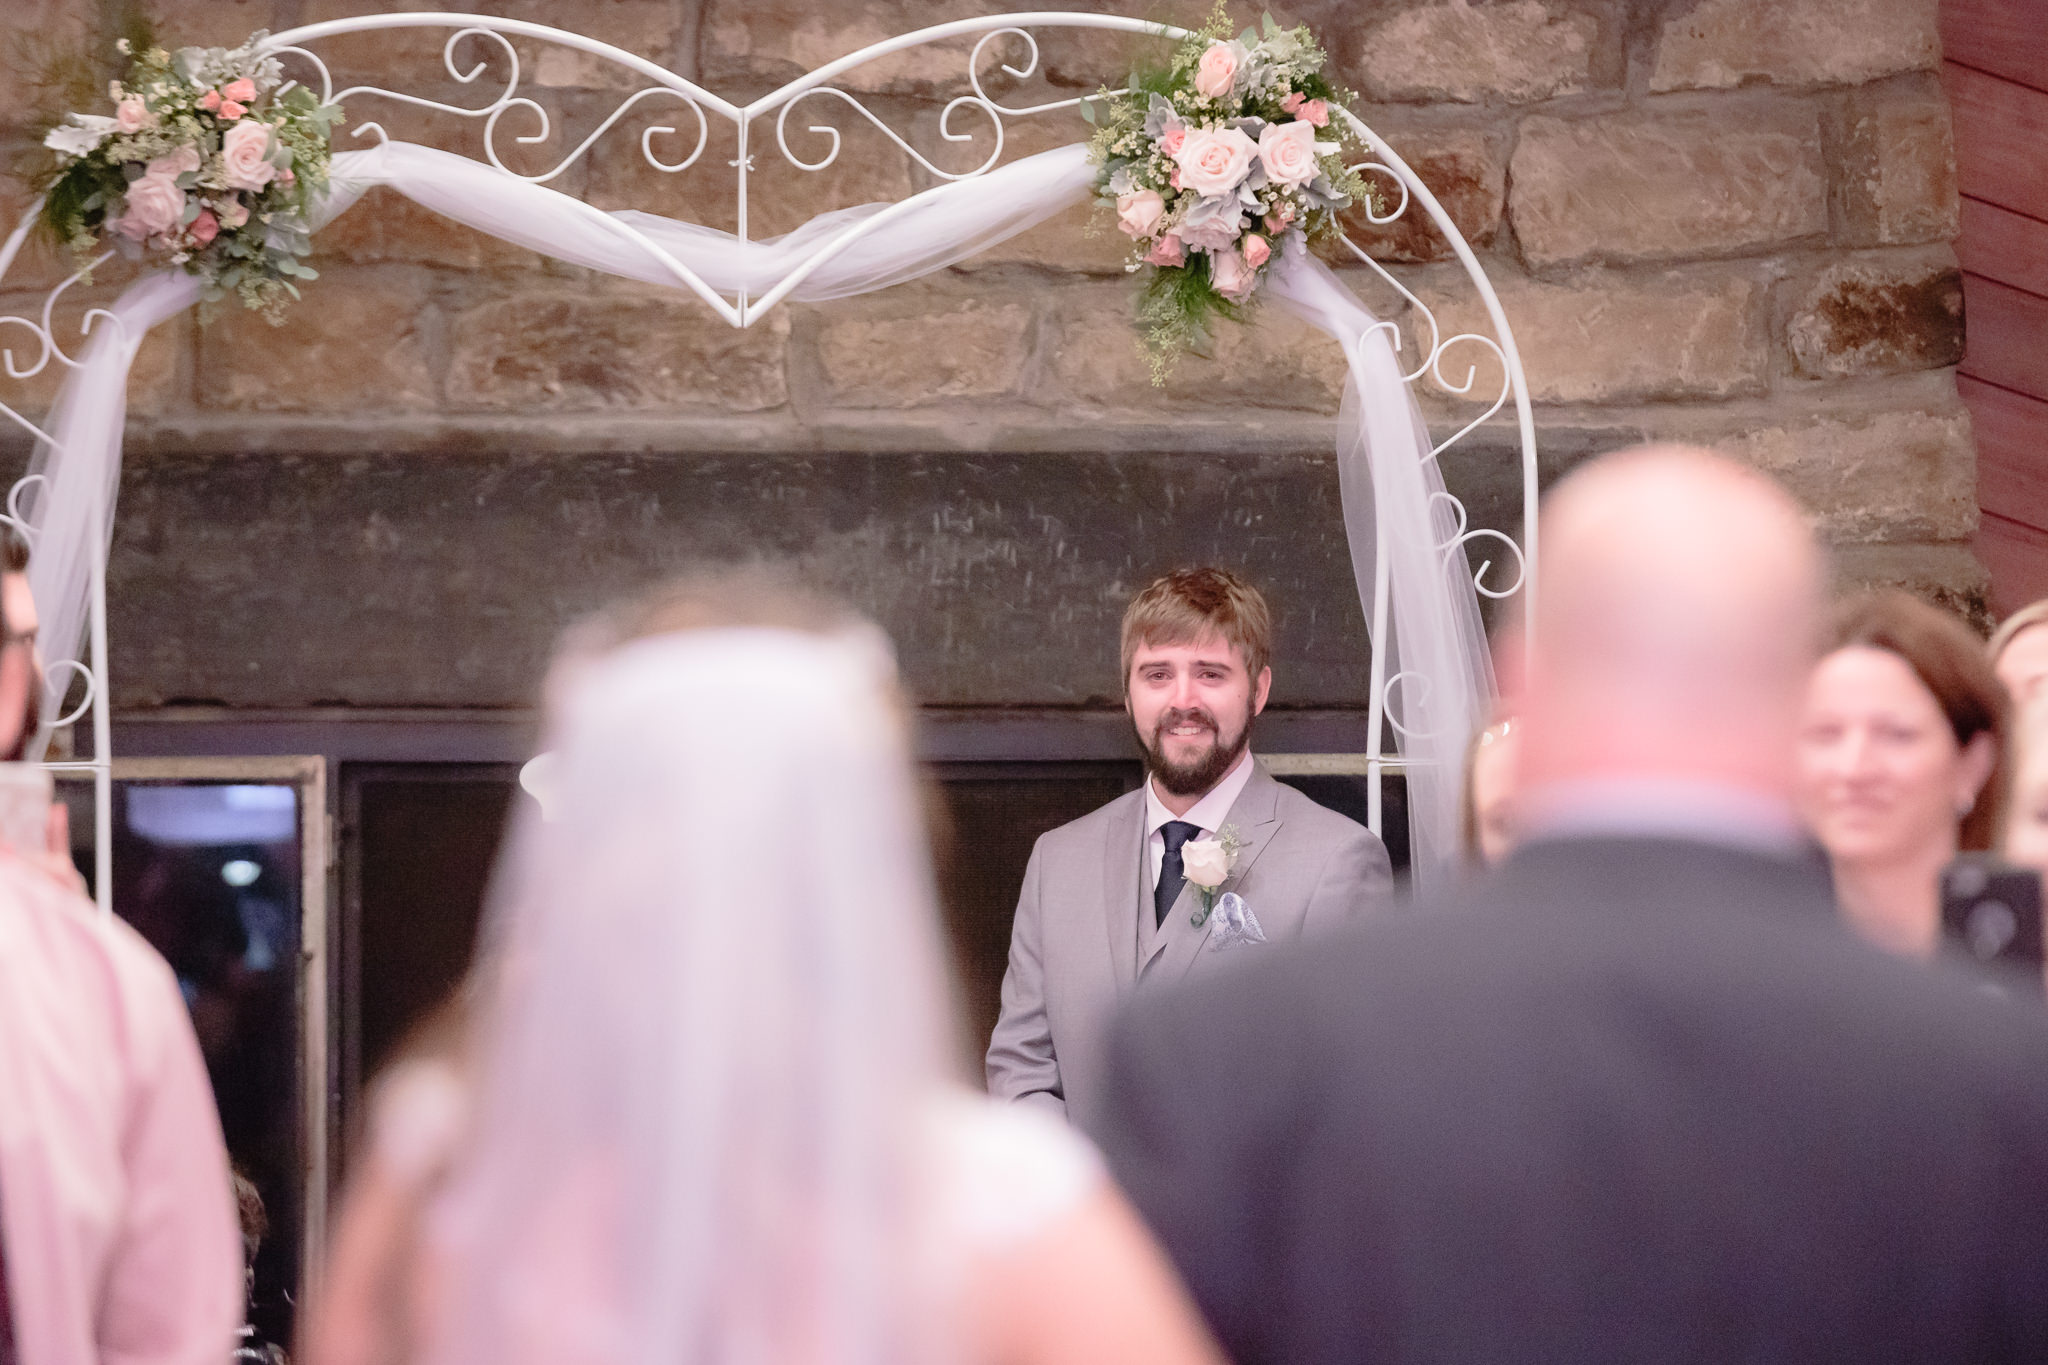 Groom smiles and holds back tears as his bride walks down the aisle at Oglebay